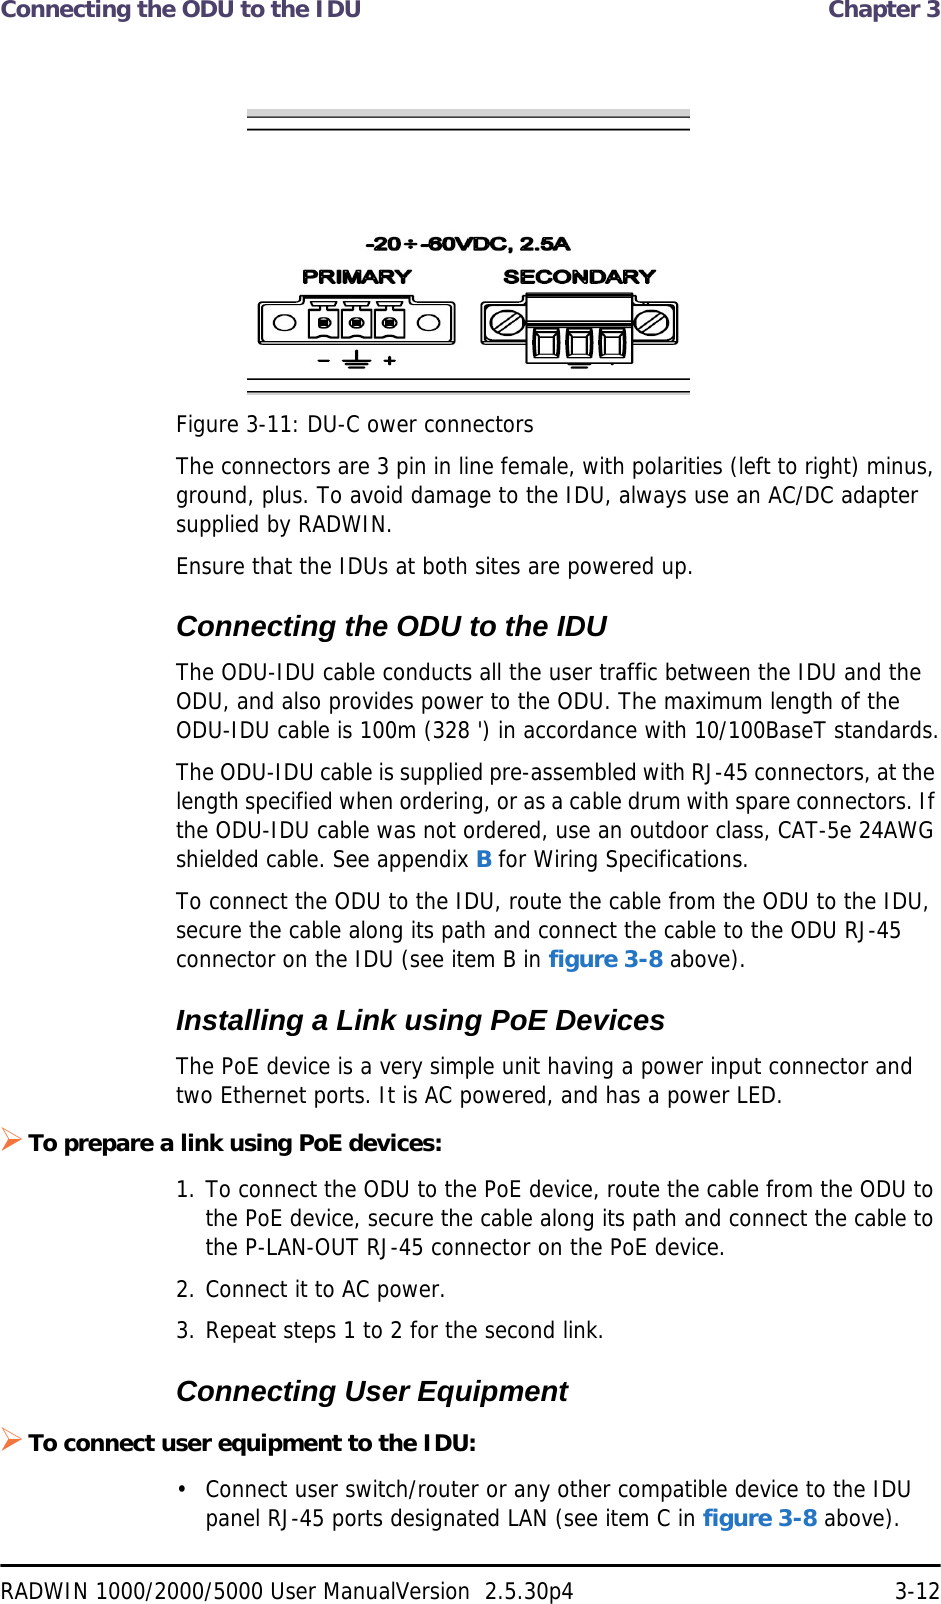 Connecting the ODU to the IDU  Chapter 3RADWIN 1000/2000/5000 User ManualVersion  2.5.30p4 3-12Figure 3-11: DU-C ower connectorsThe connectors are 3 pin in line female, with polarities (left to right) minus, ground, plus. To avoid damage to the IDU, always use an AC/DC adapter supplied by RADWIN.Ensure that the IDUs at both sites are powered up.Connecting the ODU to the IDUThe ODU-IDU cable conducts all the user traffic between the IDU and the ODU, and also provides power to the ODU. The maximum length of the ODU-IDU cable is 100m (328 &apos;) in accordance with 10/100BaseT standards.The ODU-IDU cable is supplied pre-assembled with RJ-45 connectors, at the length specified when ordering, or as a cable drum with spare connectors. If the ODU-IDU cable was not ordered, use an outdoor class, CAT-5e 24AWG shielded cable. See appendix B for Wiring Specifications.To connect the ODU to the IDU, route the cable from the ODU to the IDU, secure the cable along its path and connect the cable to the ODU RJ-45 connector on the IDU (see item B in figure 3-8 above).Installing a Link using PoE DevicesThe PoE device is a very simple unit having a power input connector and two Ethernet ports. It is AC powered, and has a power LED.To prepare a link using PoE devices:1. To connect the ODU to the PoE device, route the cable from the ODU to the PoE device, secure the cable along its path and connect the cable to the P-LAN-OUT RJ-45 connector on the PoE device.2. Connect it to AC power.3. Repeat steps 1 to 2 for the second link.Connecting User EquipmentTo connect user equipment to the IDU:• Connect user switch/router or any other compatible device to the IDU panel RJ-45 ports designated LAN (see item C in figure 3-8 above).